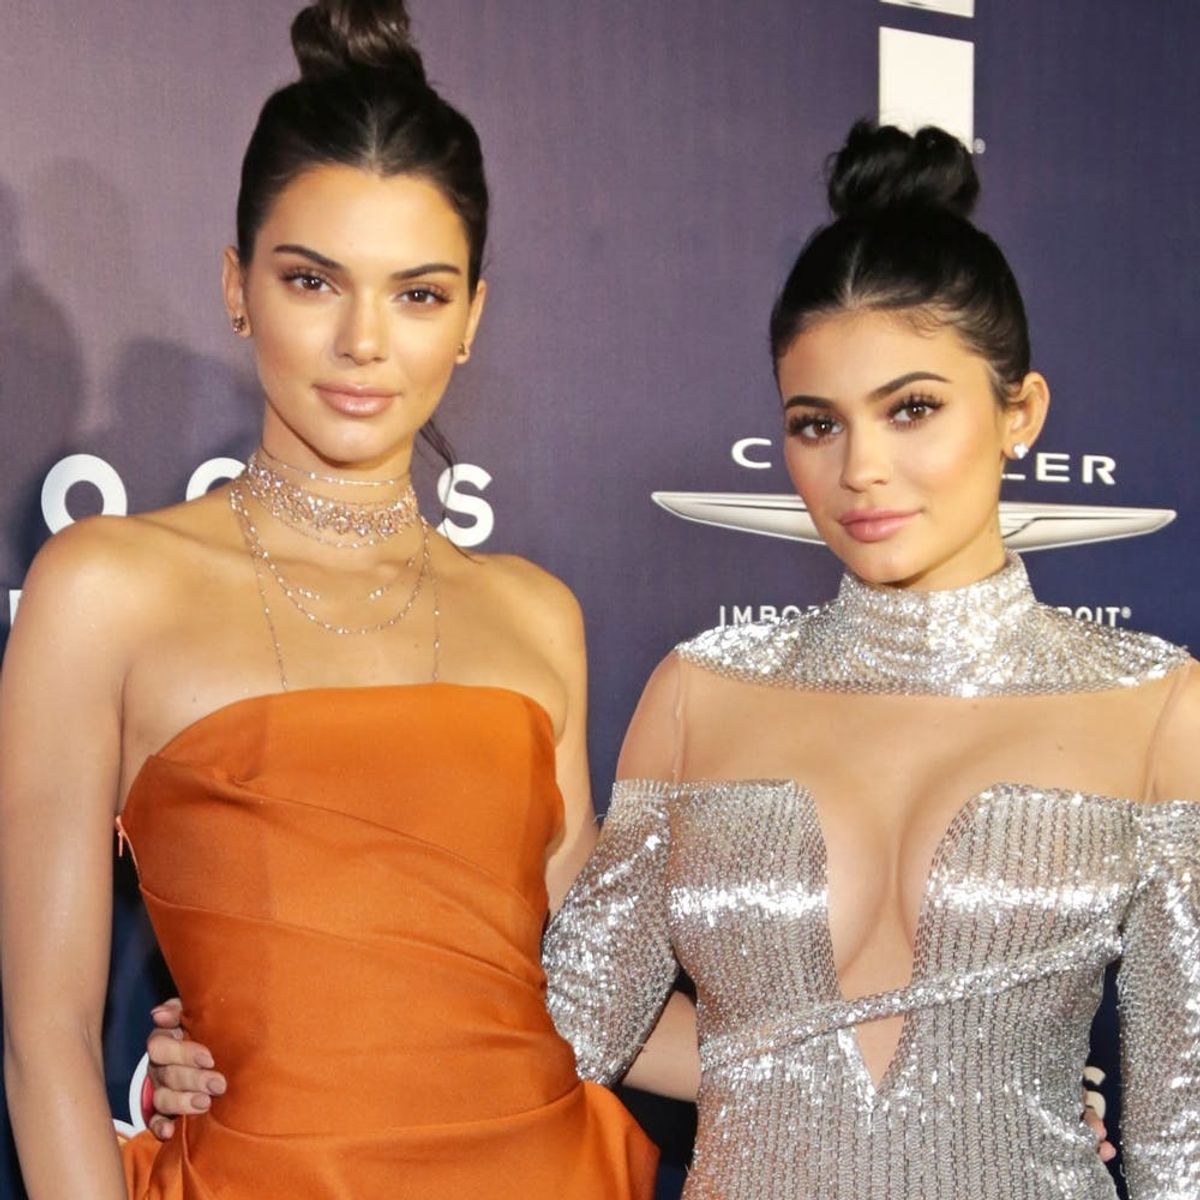 Kendall and Kylie Jenner Have Issued an Apology for Those Controversial Vintage Tees